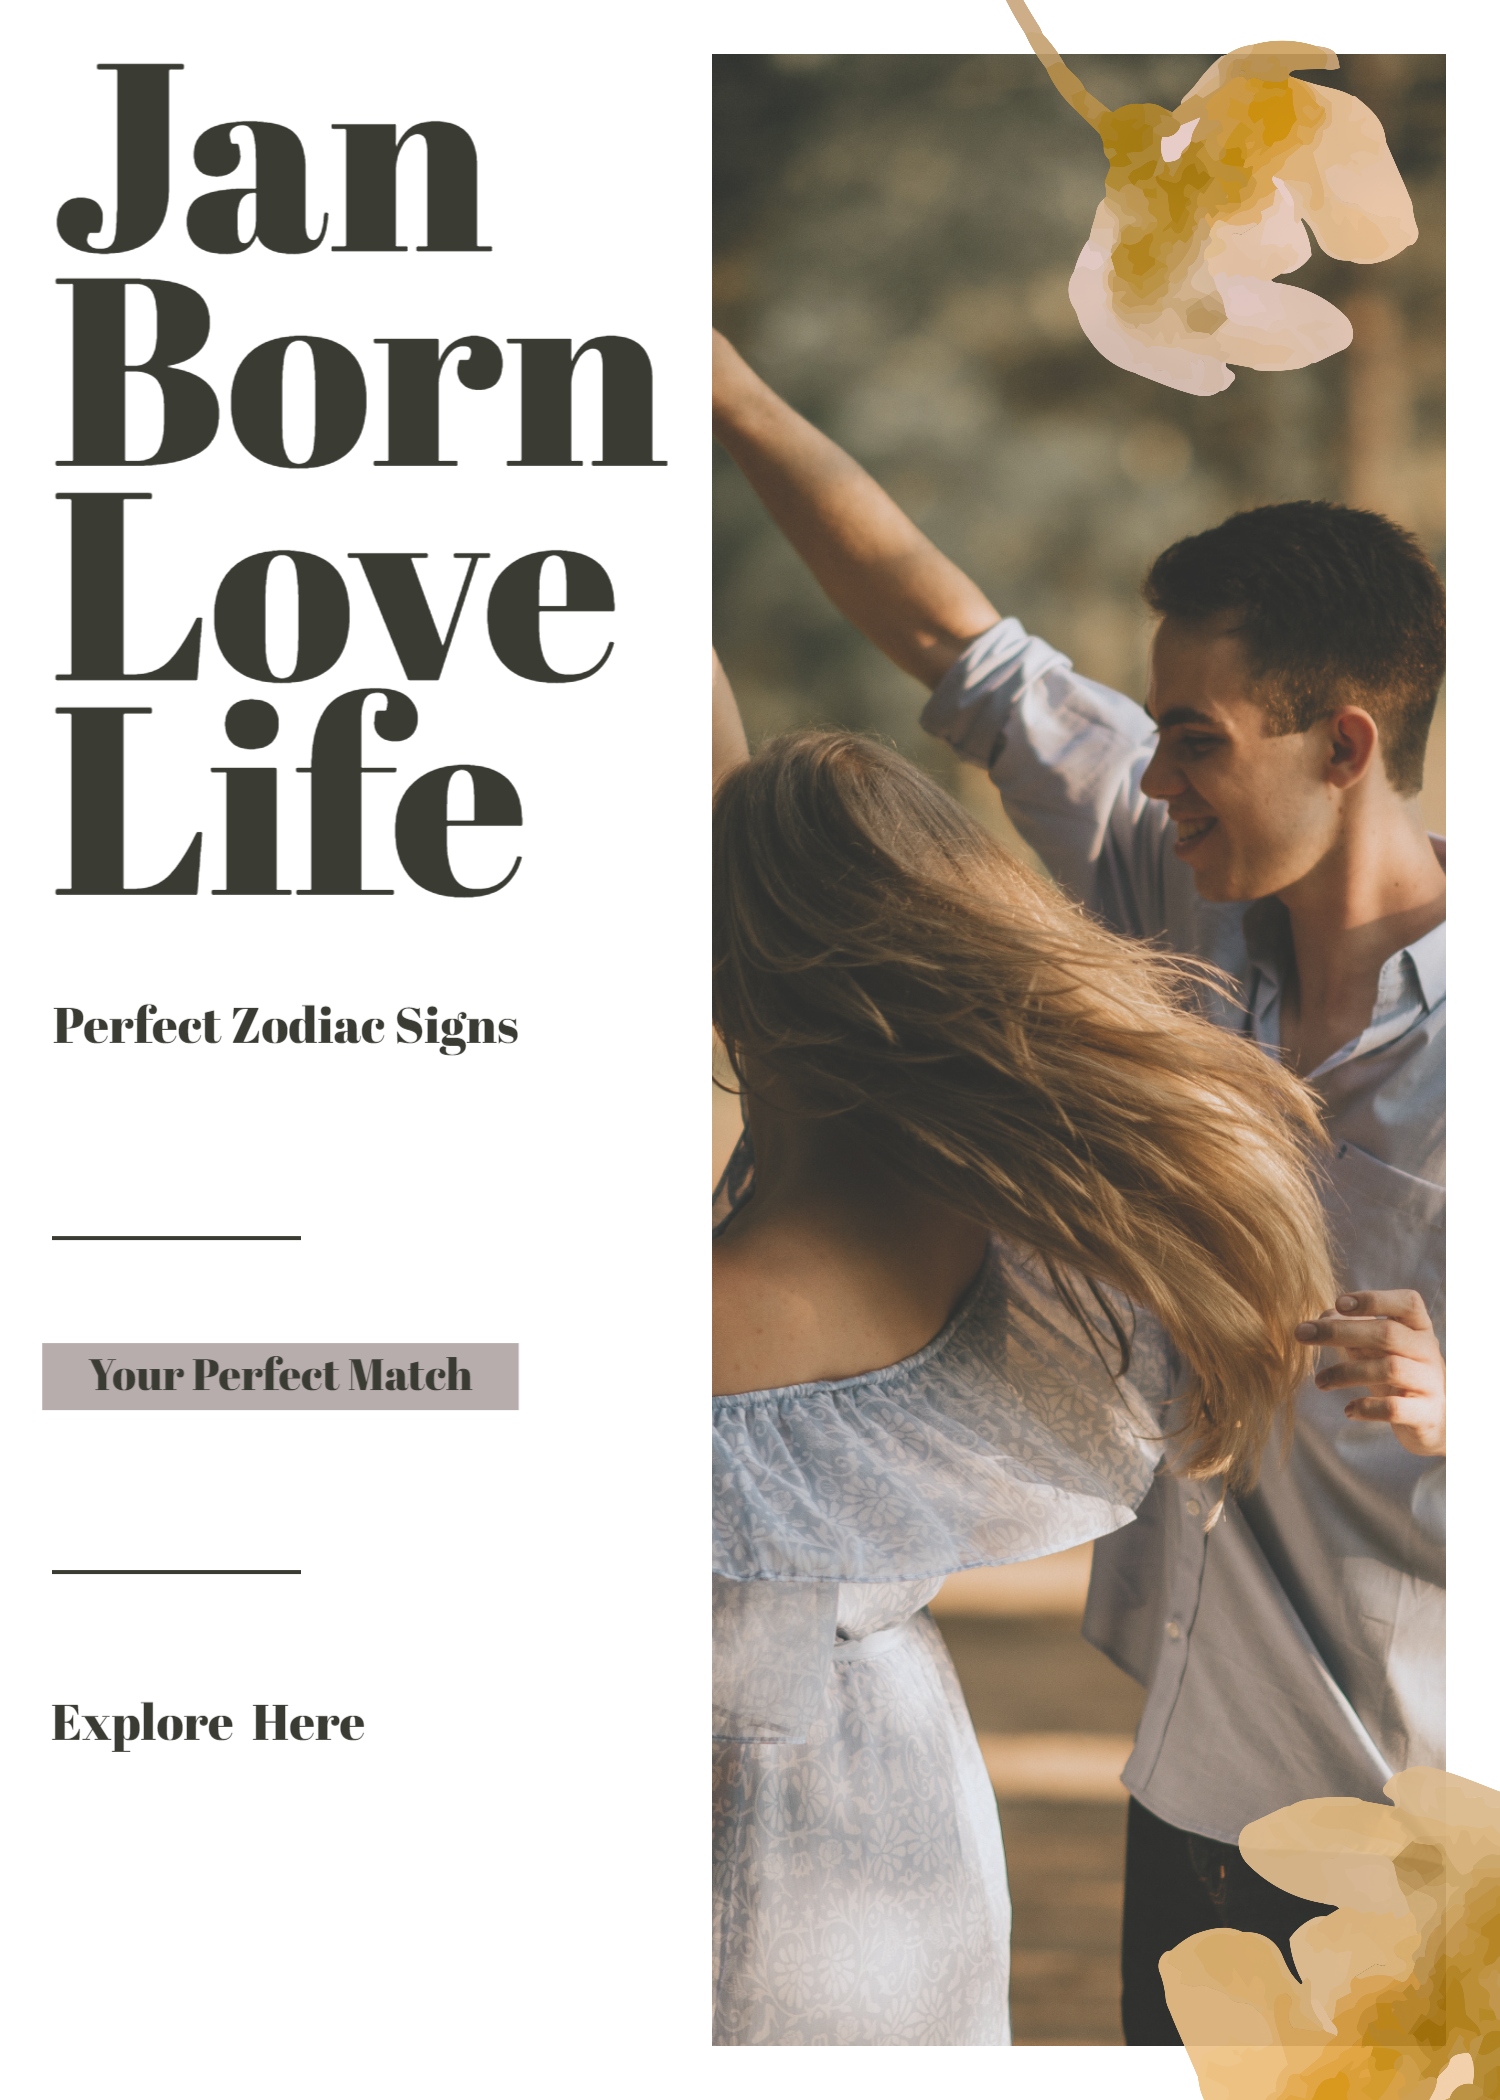 January Born Love Life: Things to Expect in a Relationship